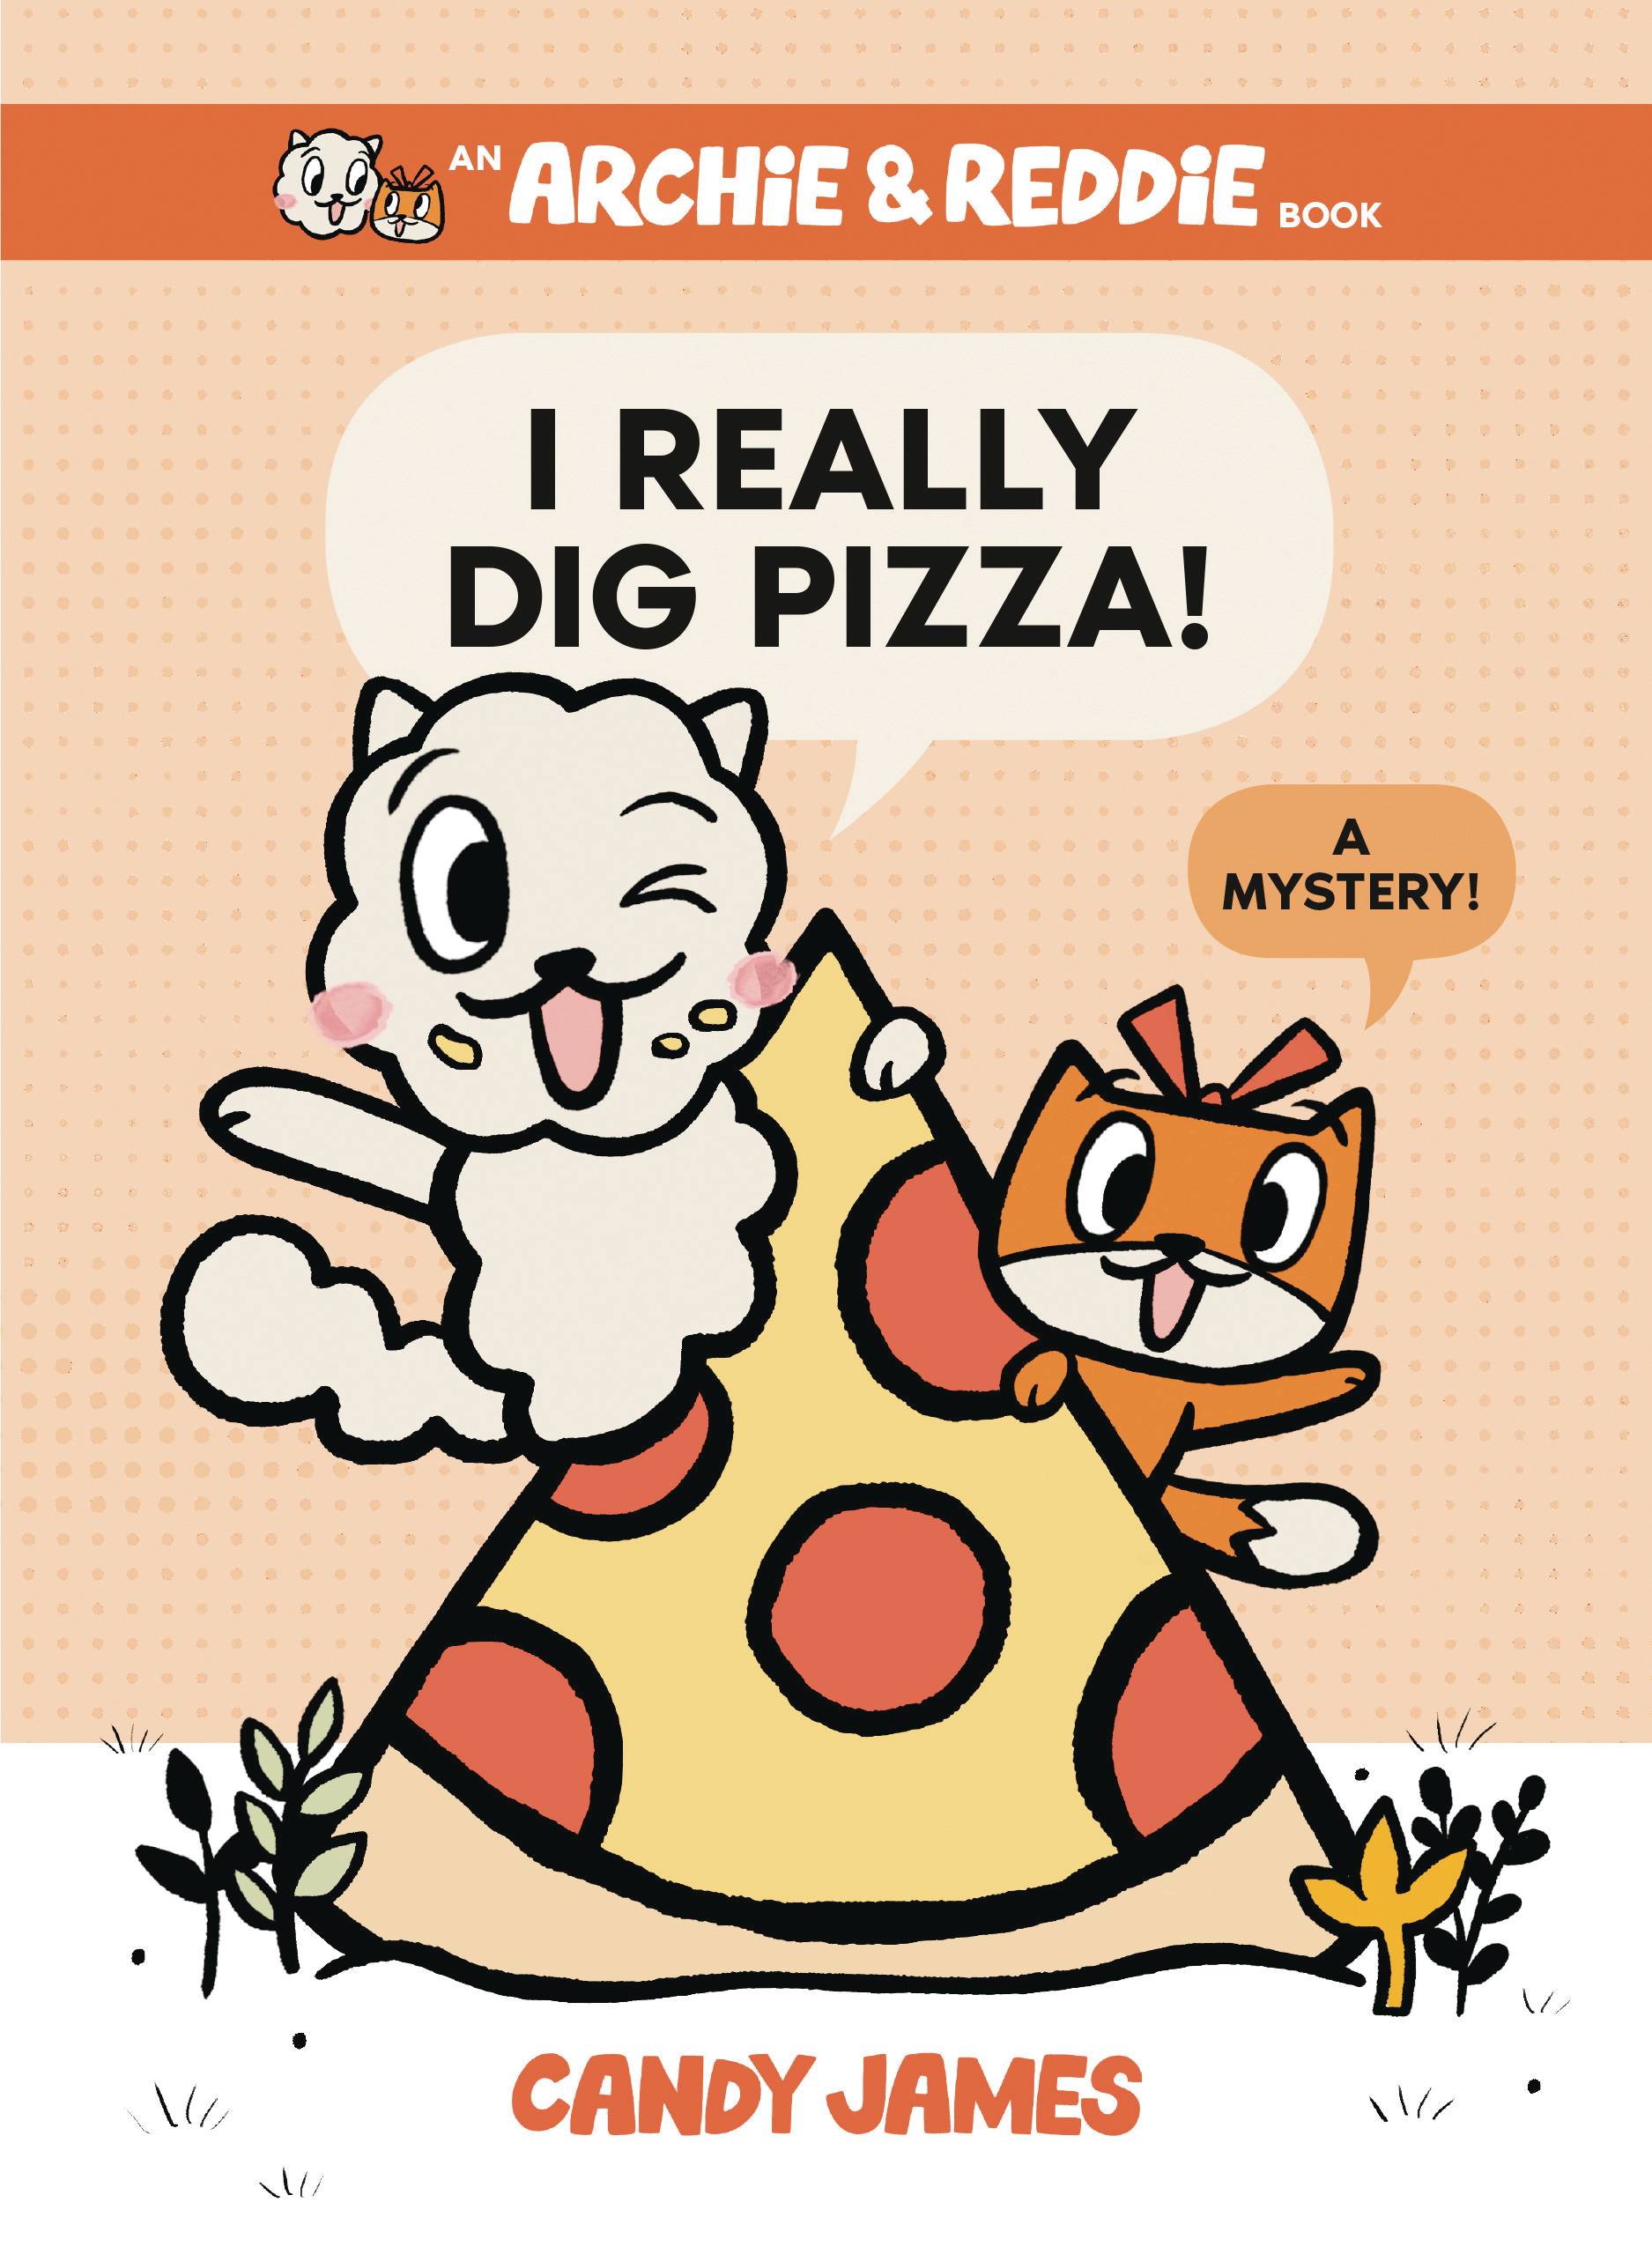 ARCHIE & REDDIE GN VOL 01 I REALLY DIG PIZZA  A MYSTERY